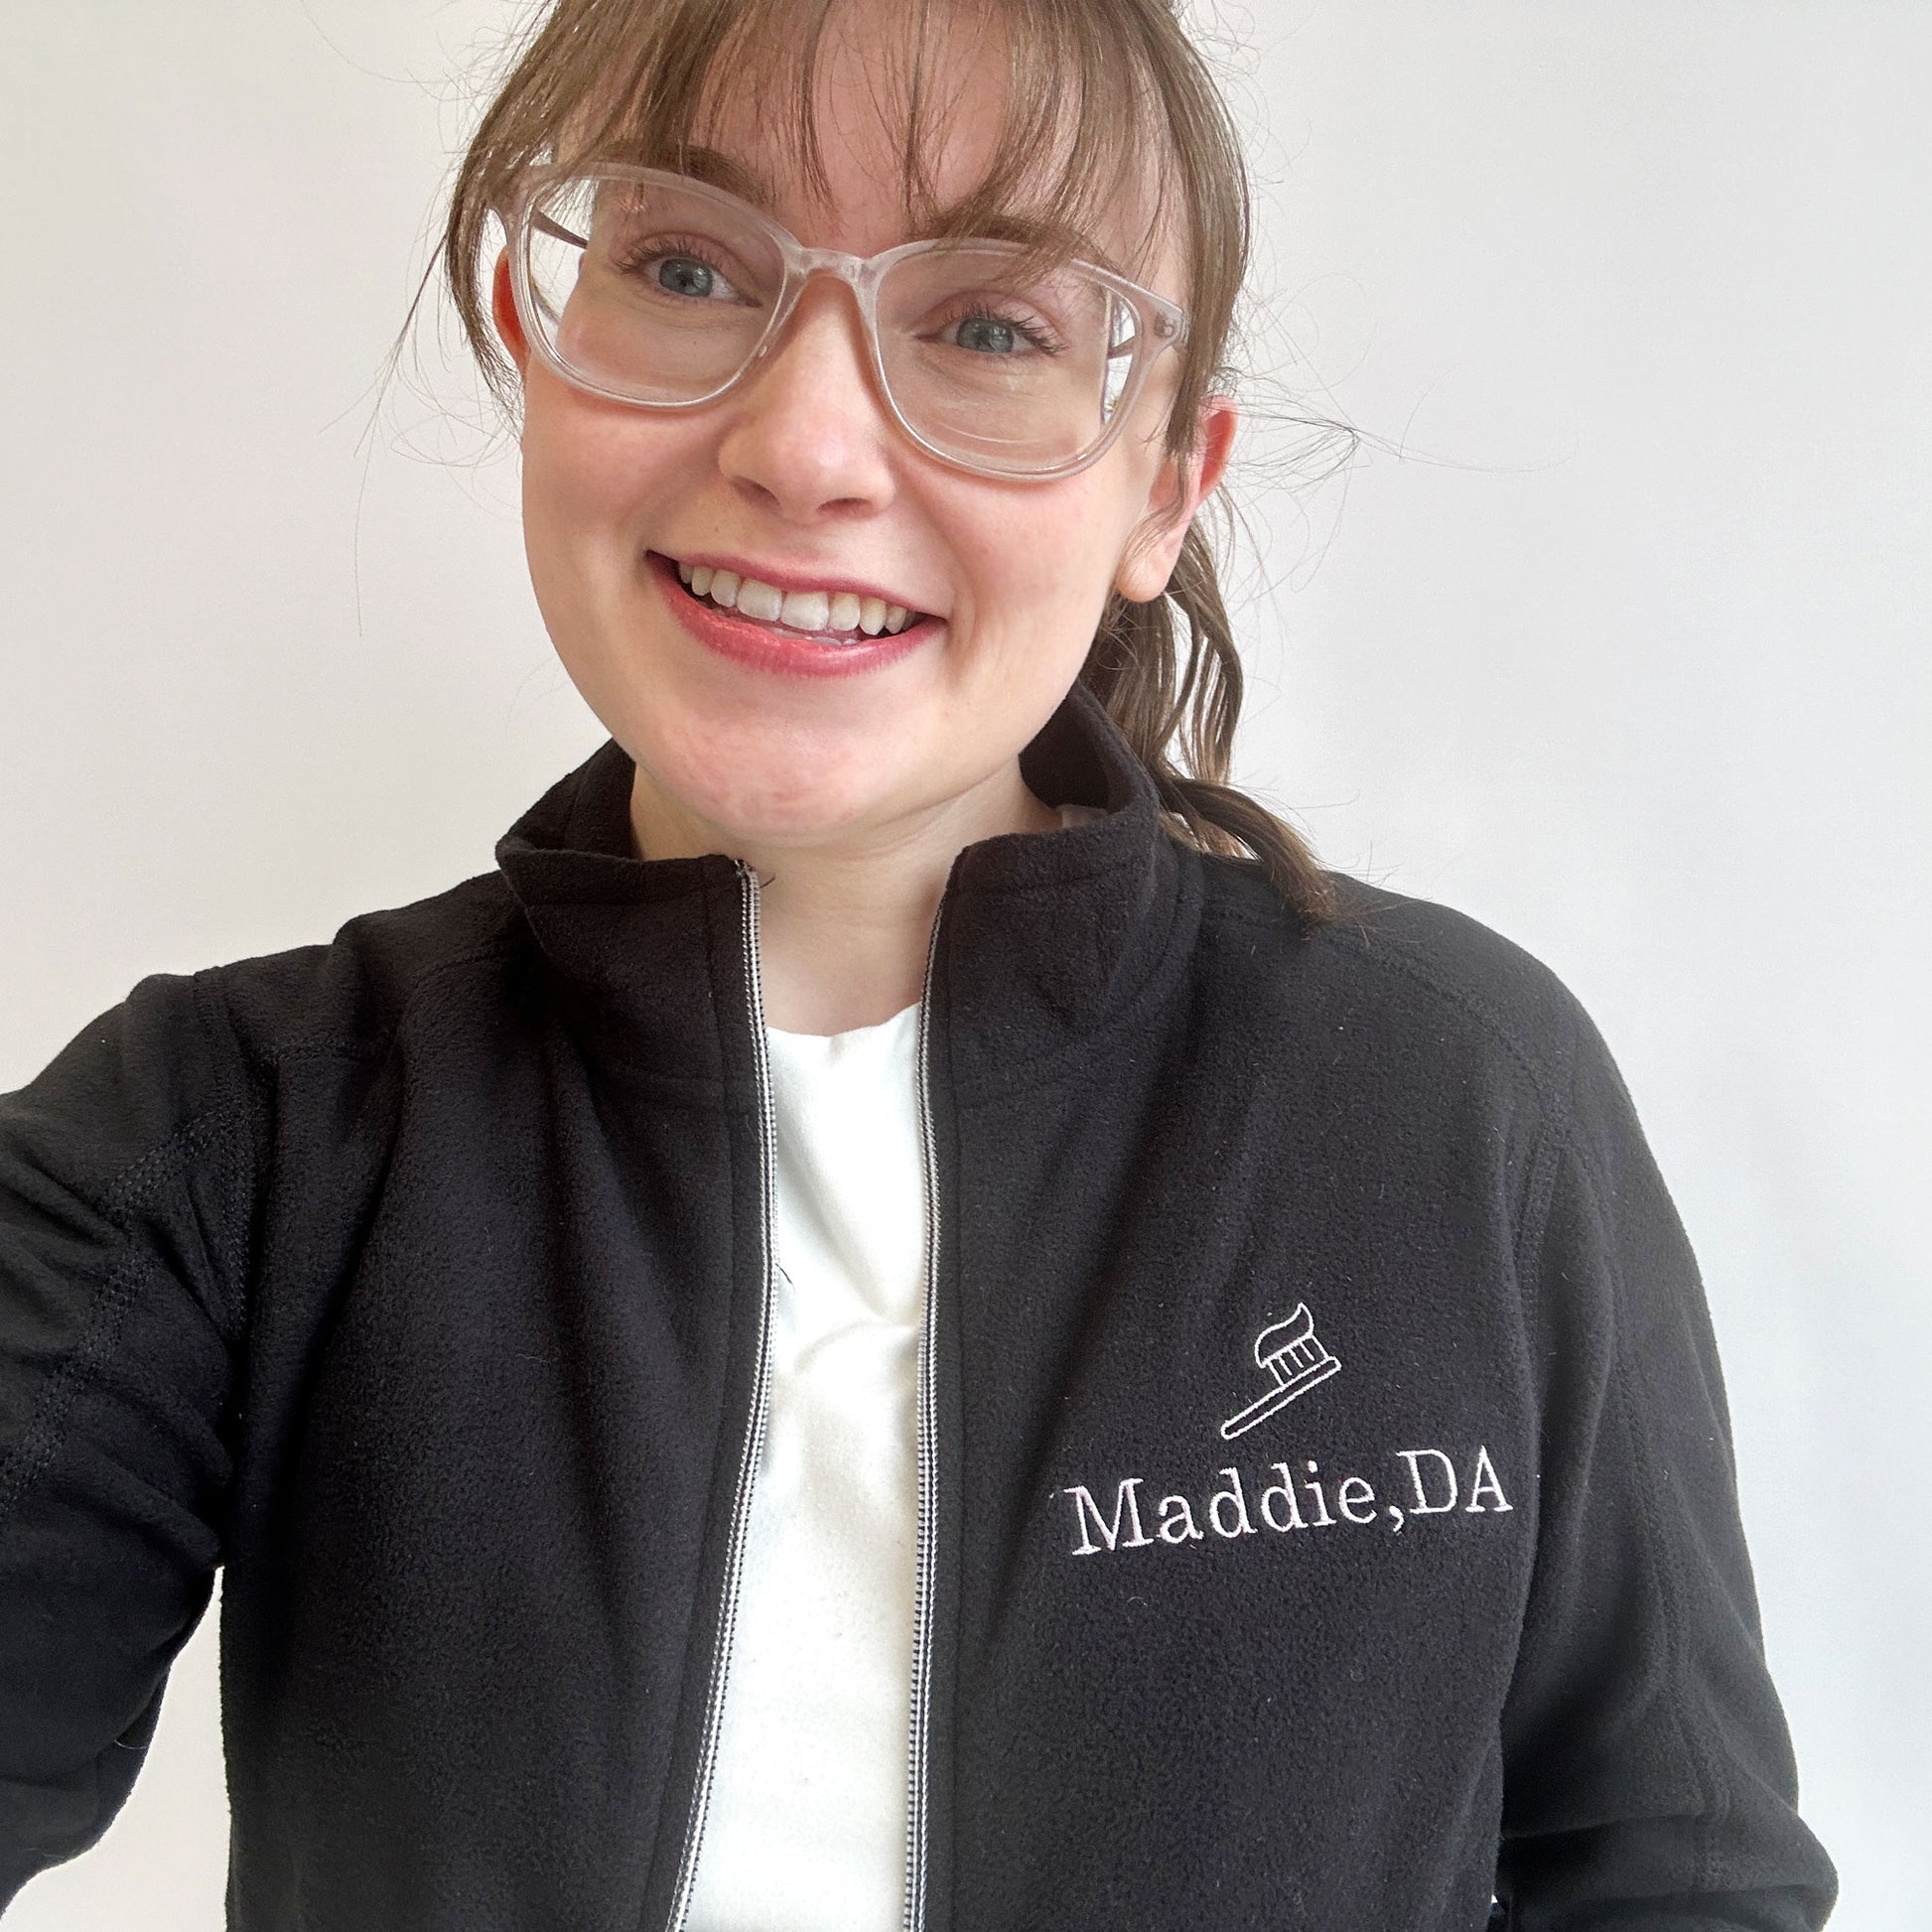 young woman wearing a full zip fleece black jacket with mini embroidered toothbrush outline and name Maddie DA in lilac thread on the left chest